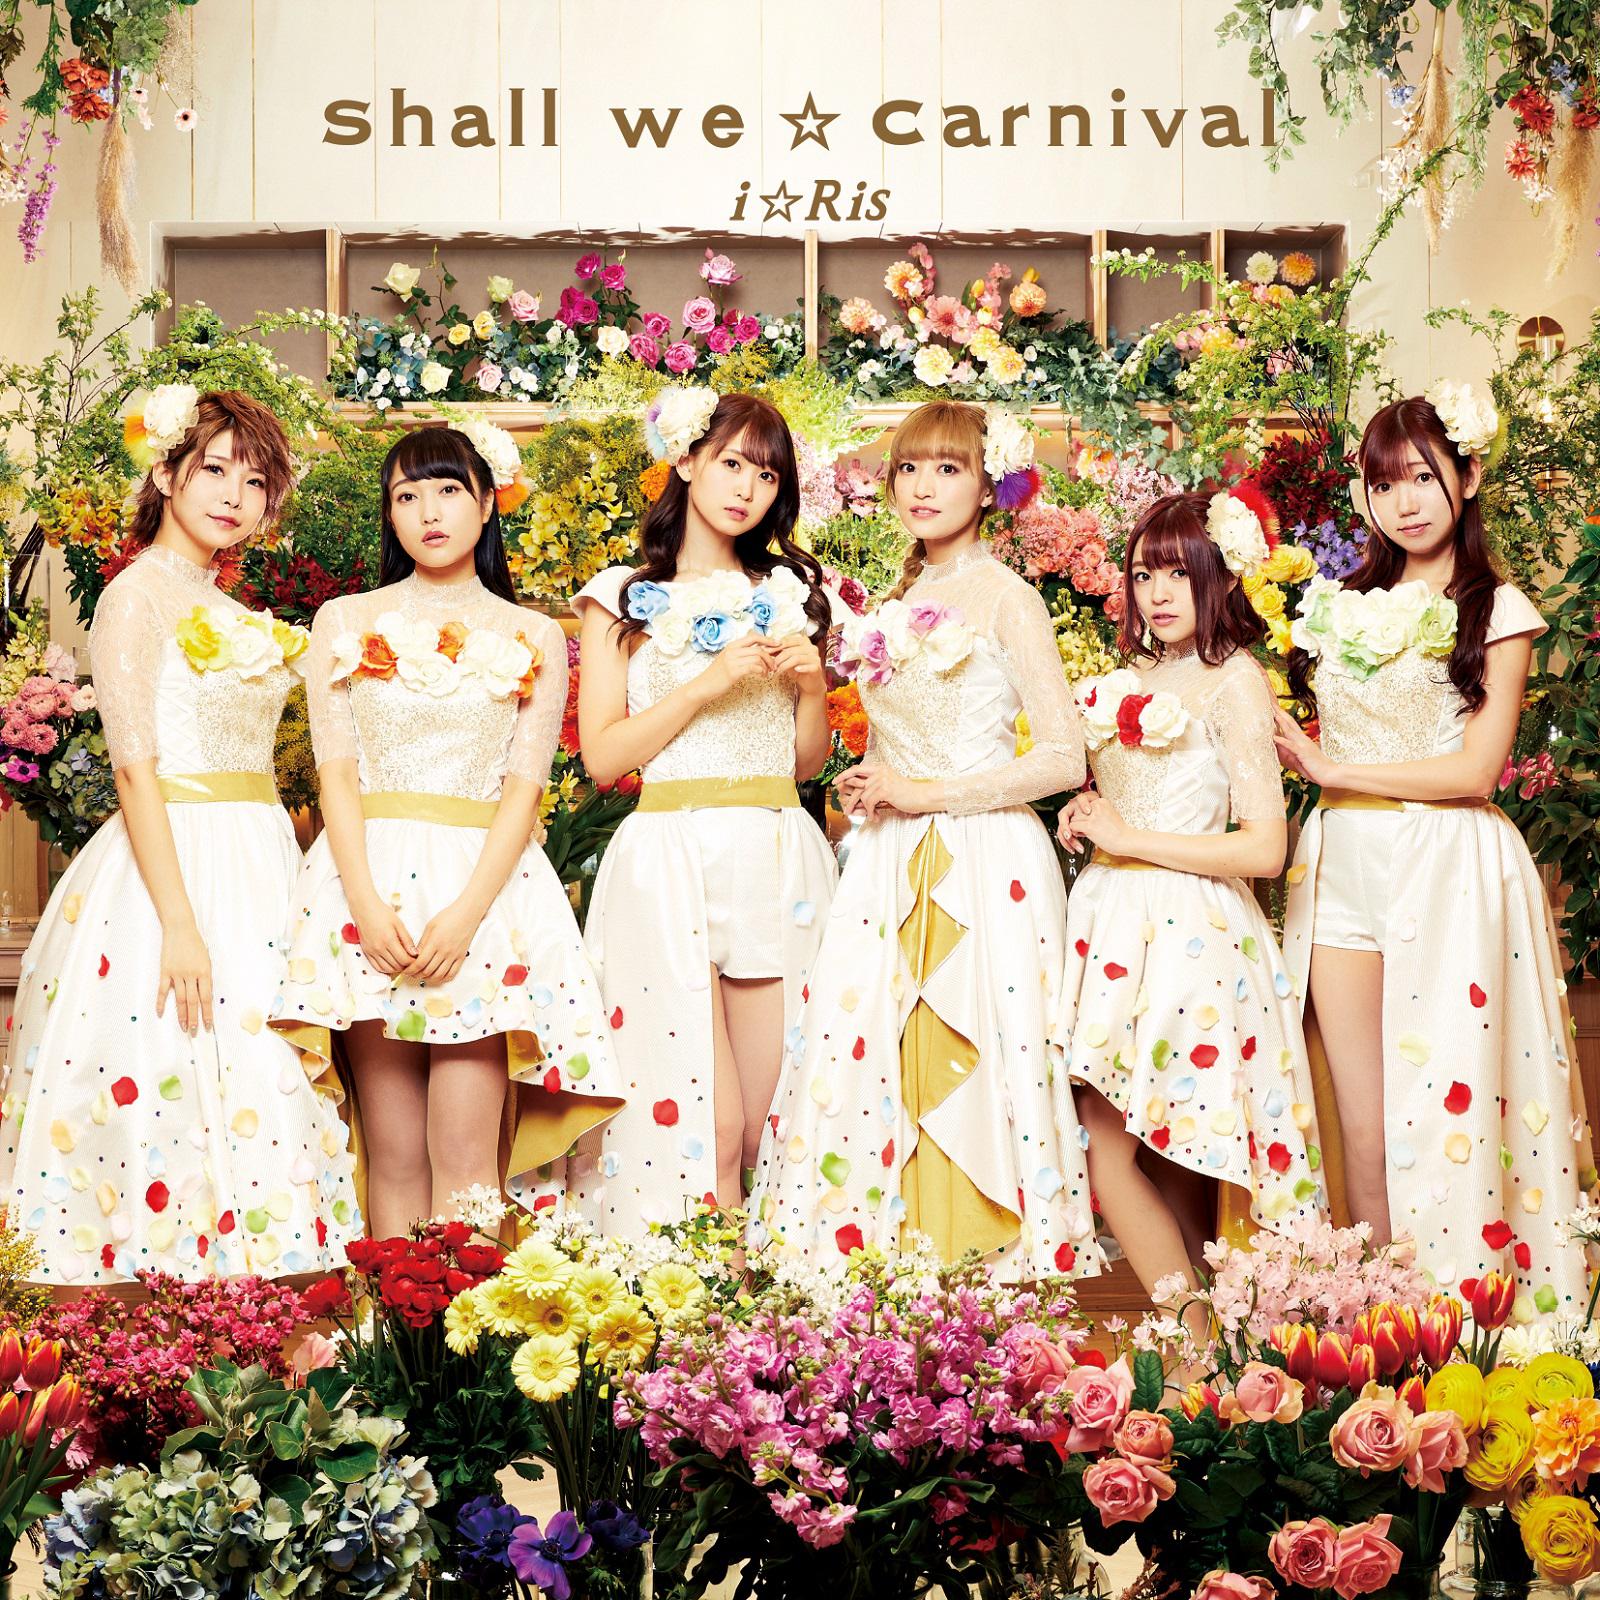 Shall we Carnival